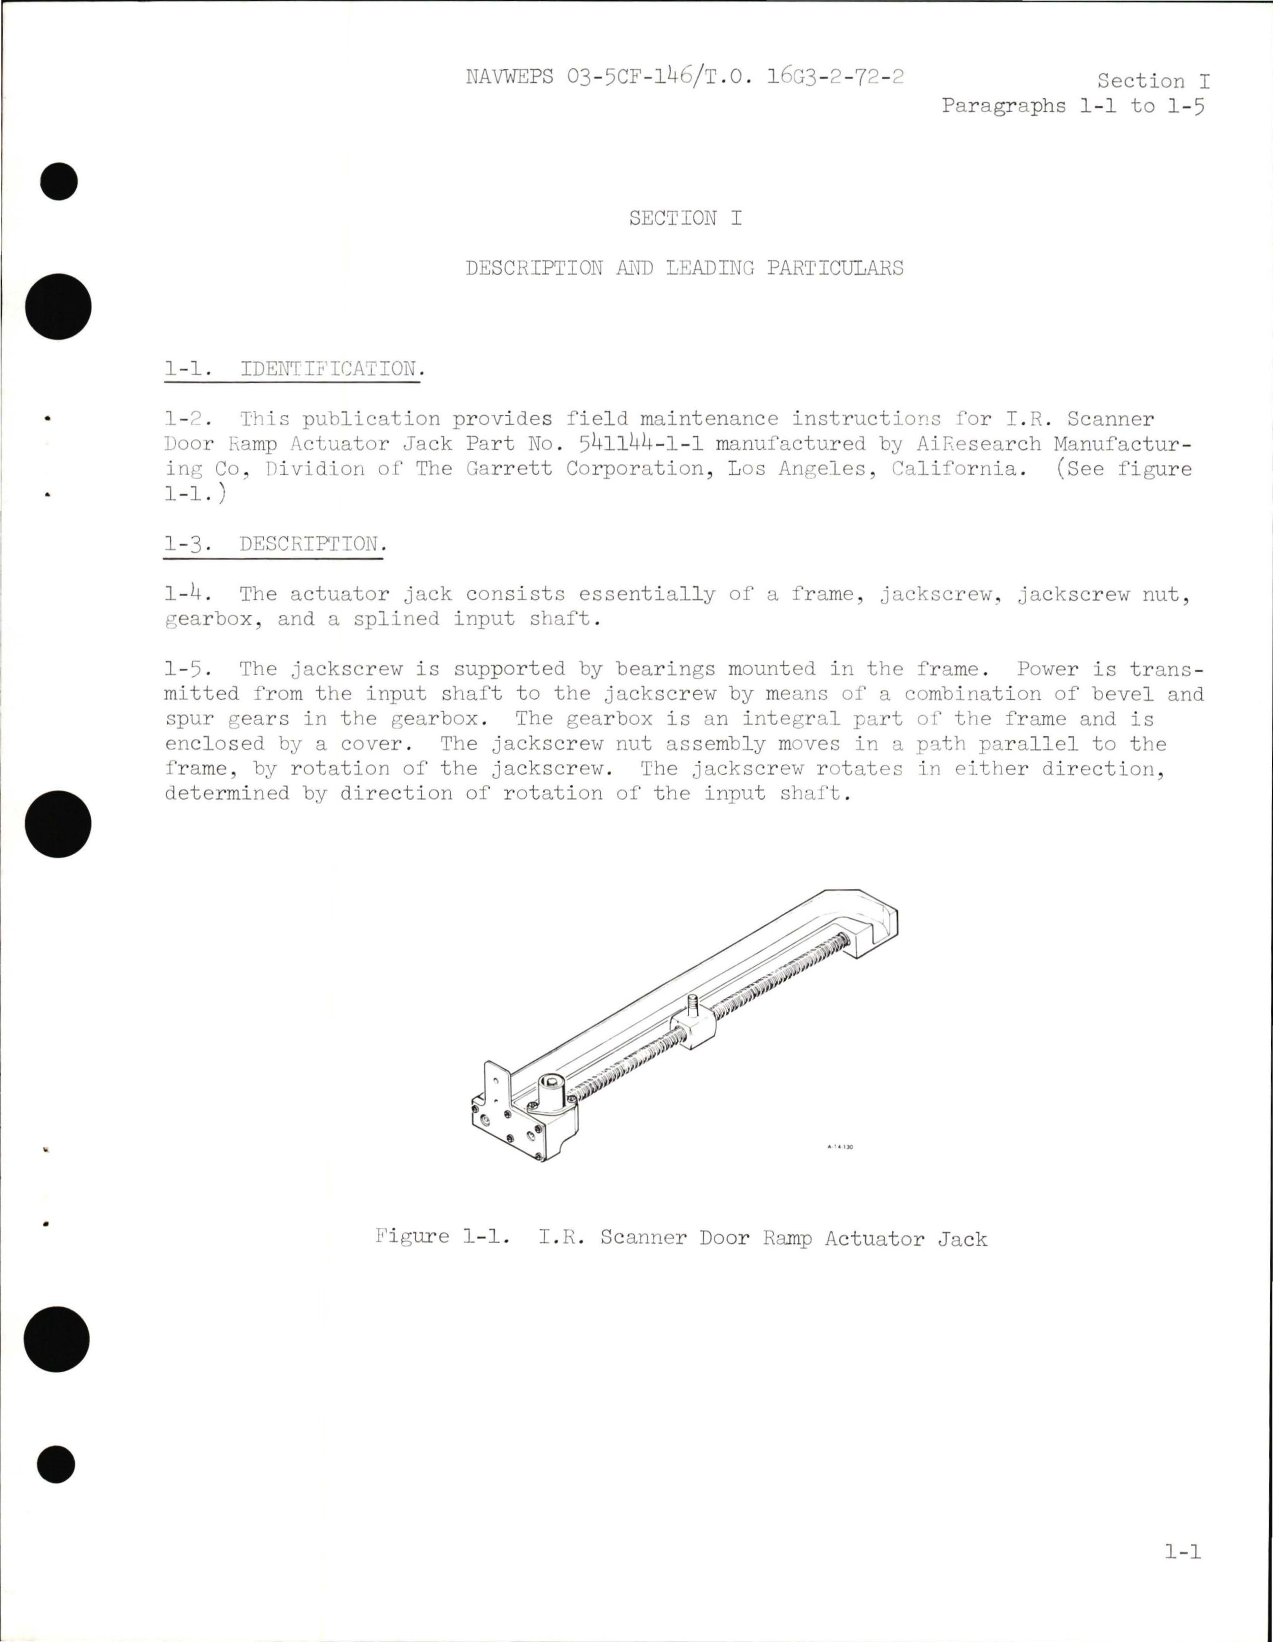 Sample page 5 from AirCorps Library document: Field Maintenance for I.R. Scanner Door Ramp Actuator Jacks - Part 541144-1-1 and 541144-2-1 